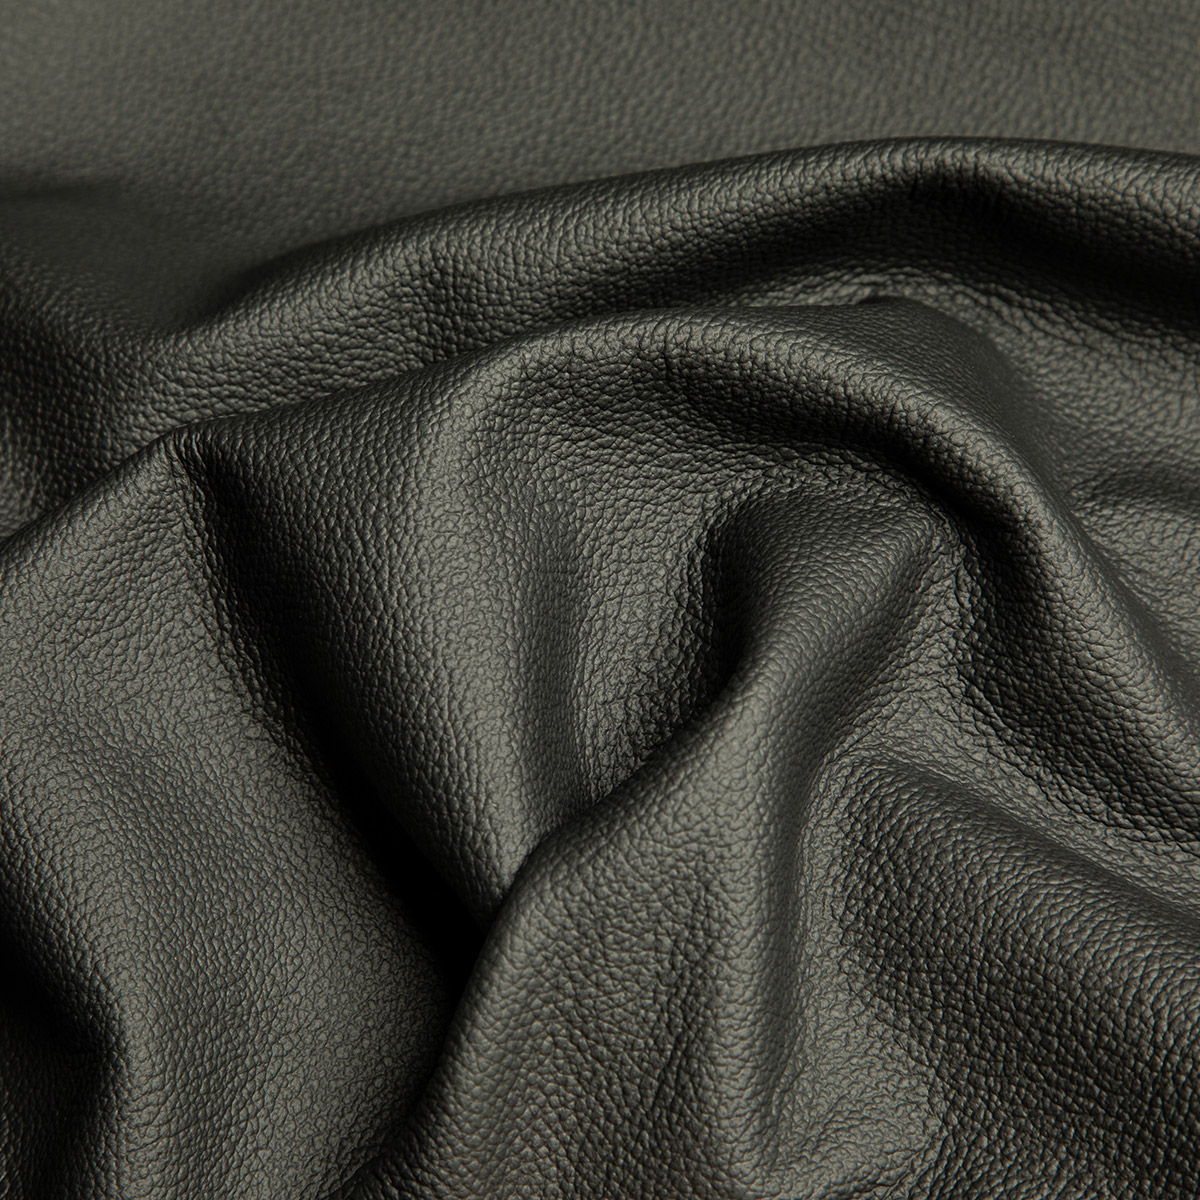 Diana: Pigmented Leather, Automotive Leather | Gruppo DANI Tannery